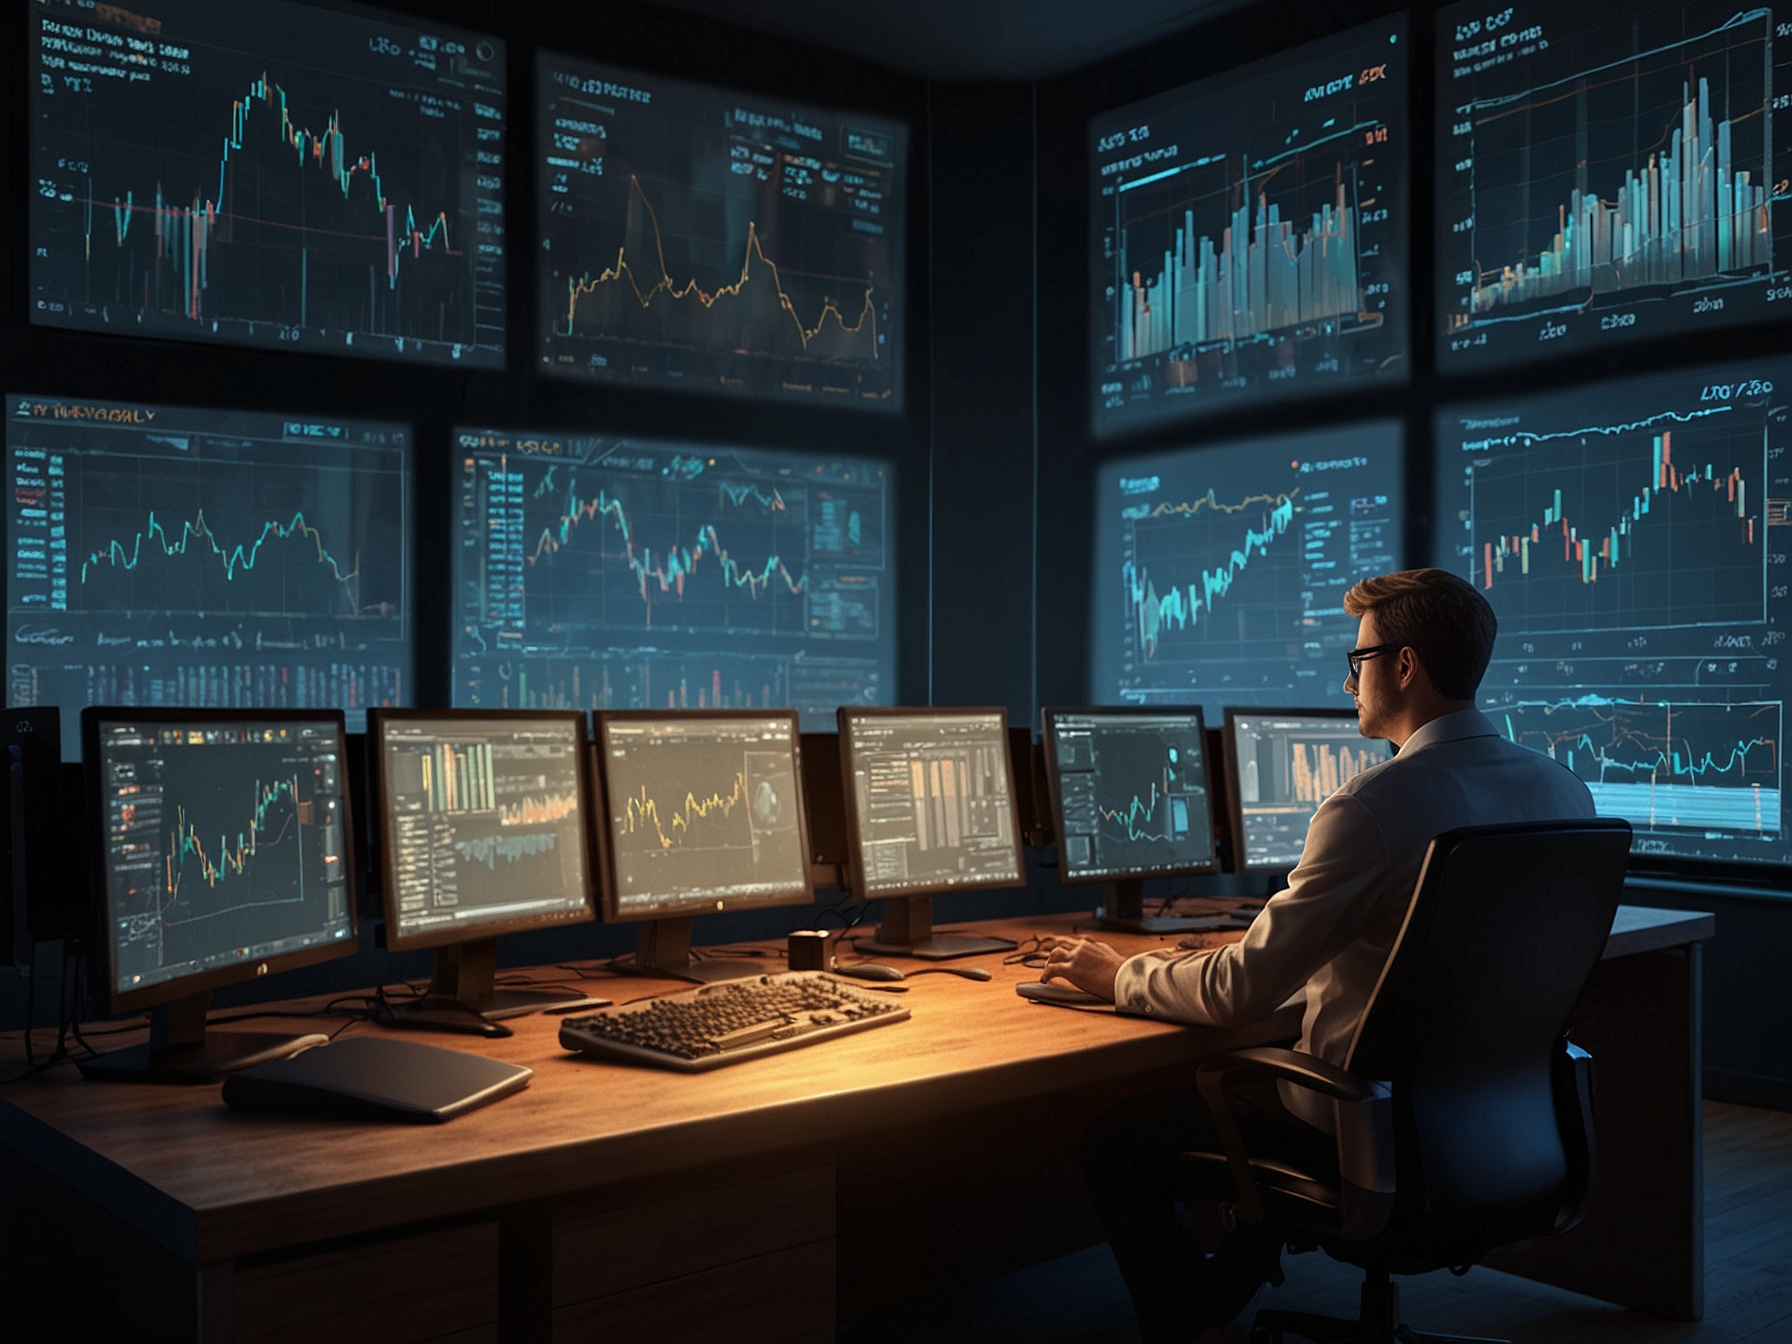 A modern trading desk equipped with advanced technology, where financial analysts are shown monitoring real-time cryptocurrency transactions and market trends.